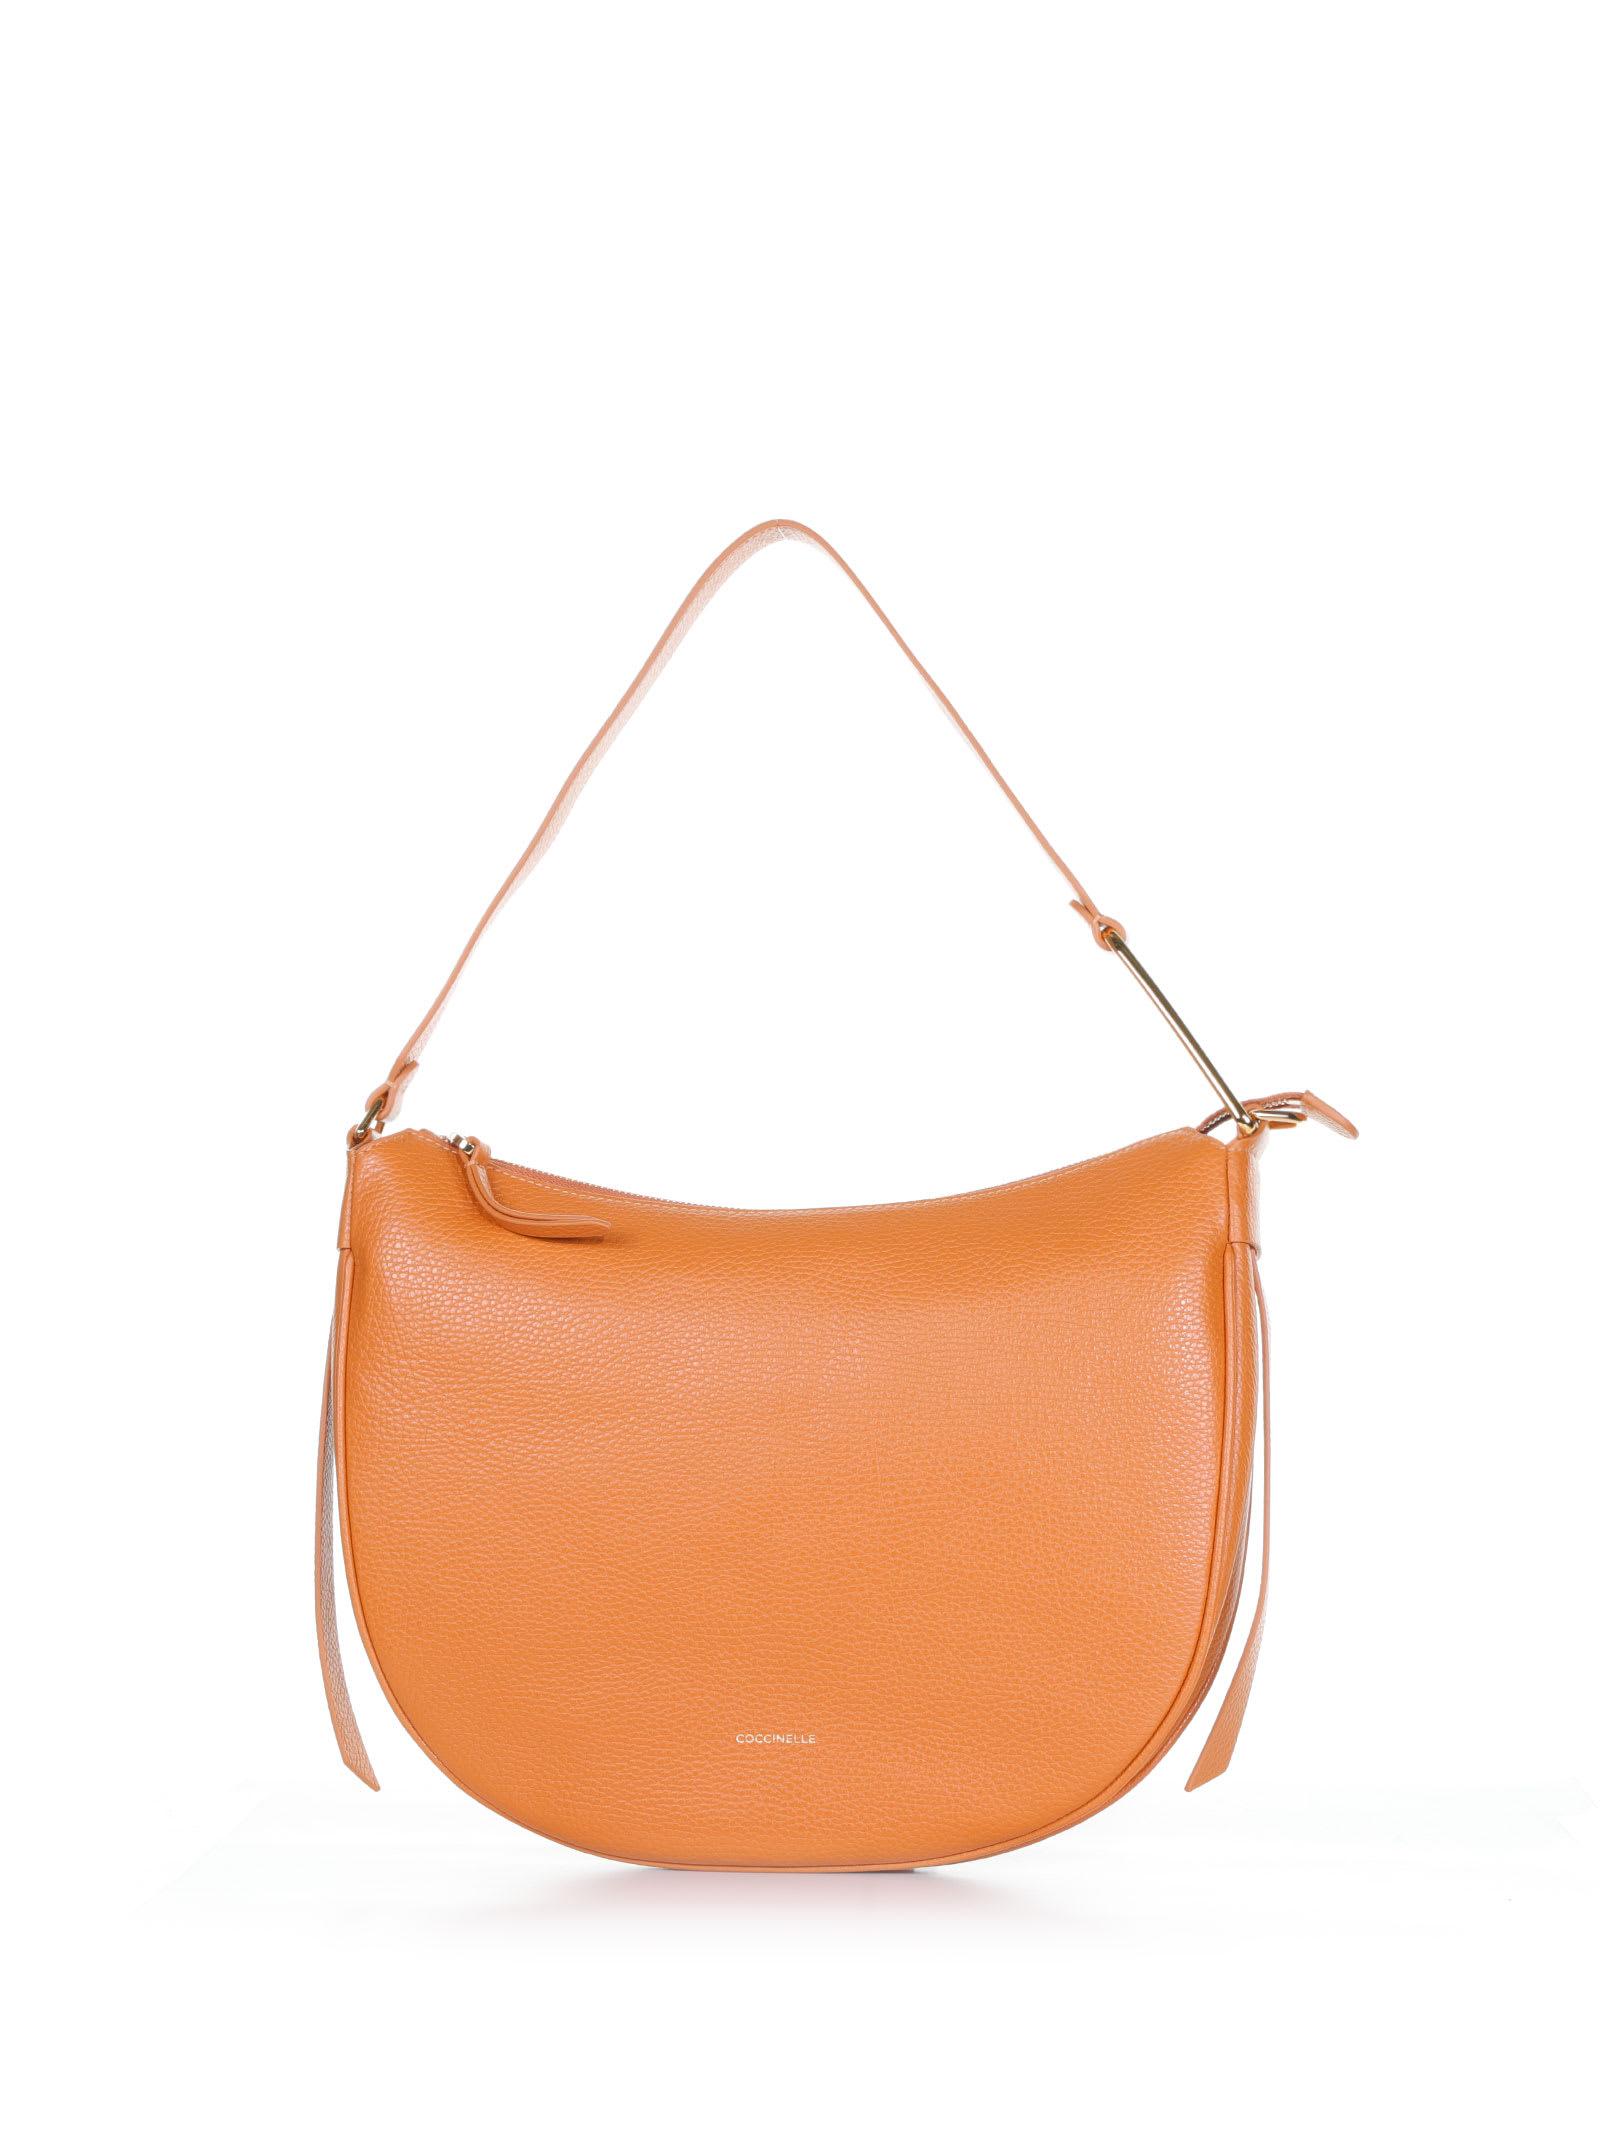 Coccinelle Priscilla Shoulder Bag In Leather in White | Lyst